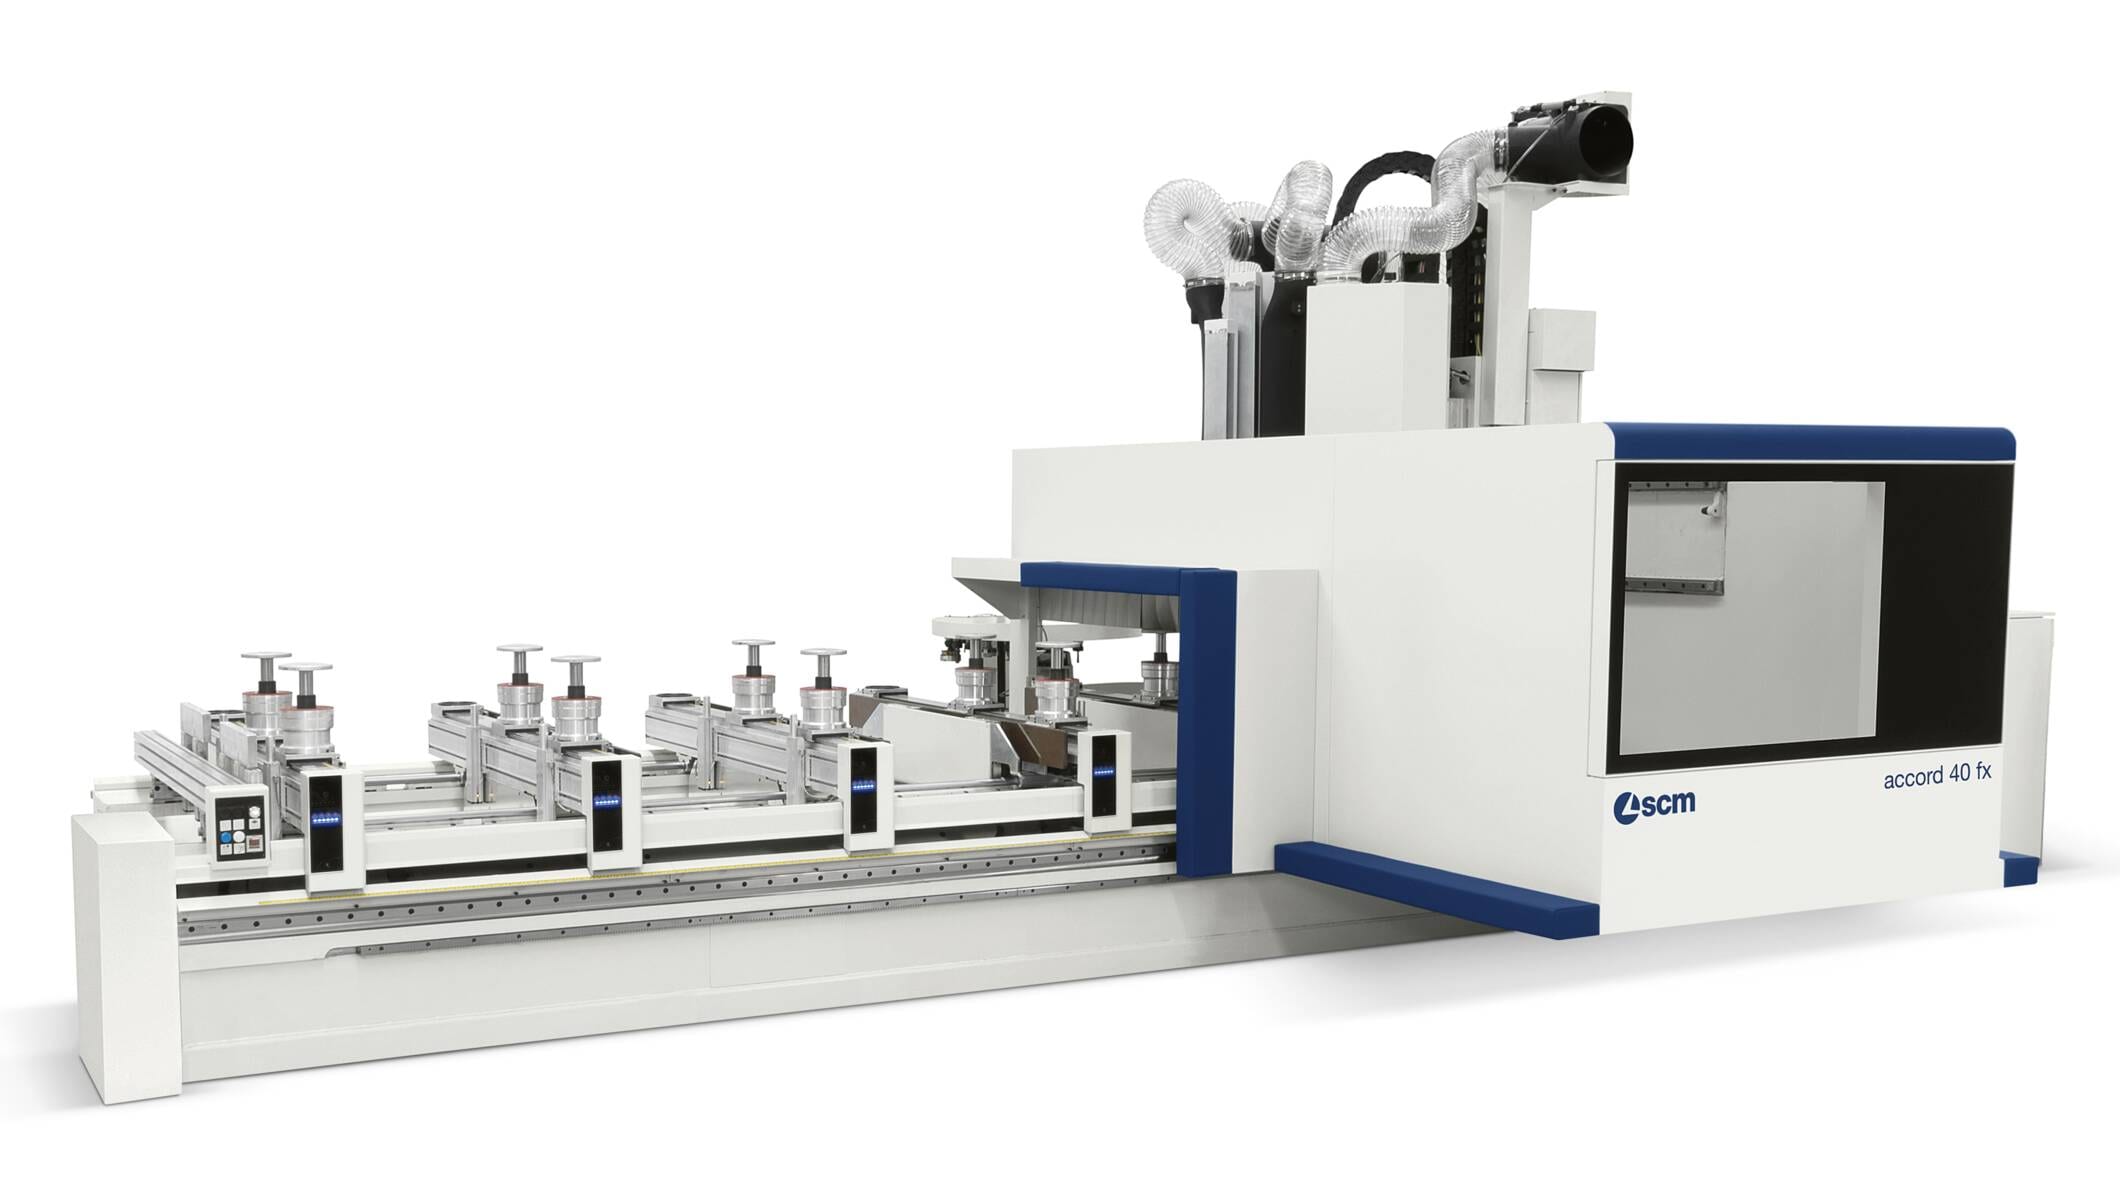 CNC Machining Centres - CNC Machining Centres for routing and drilling - accord 40 fx